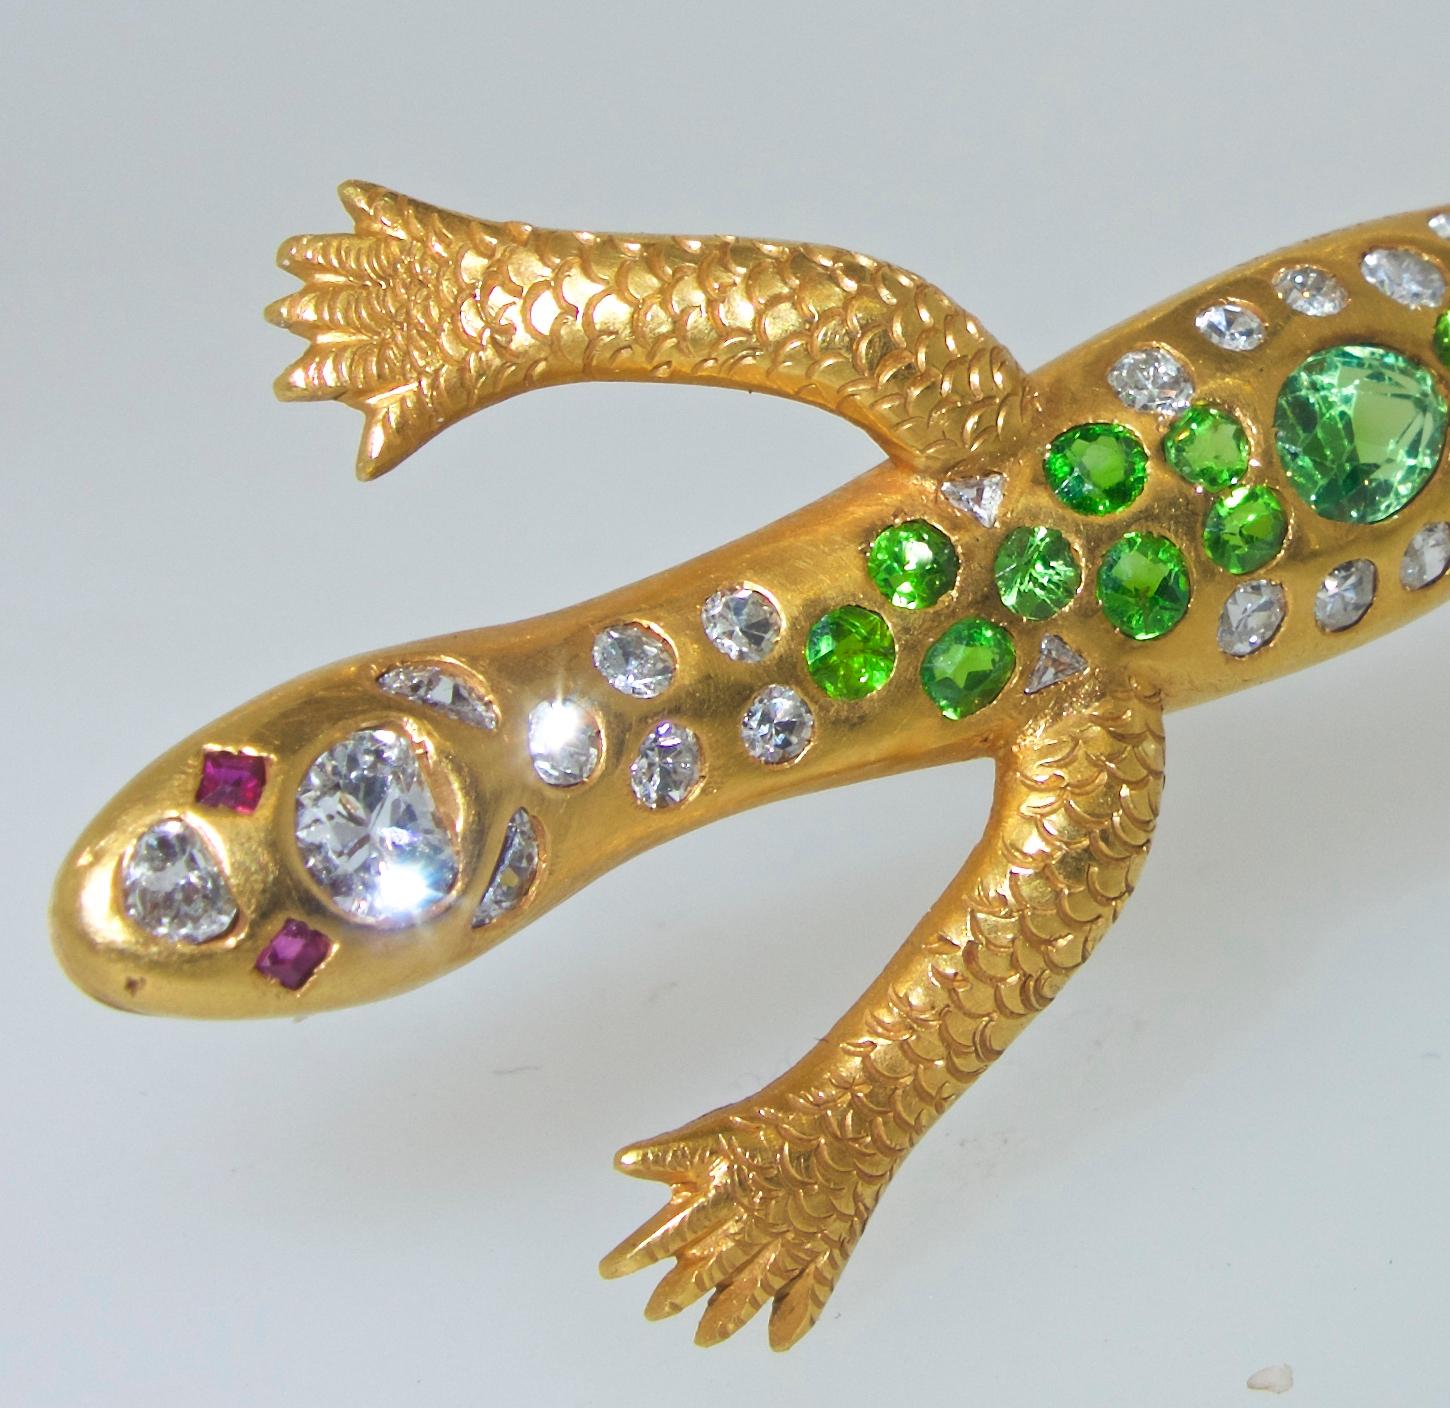 Demontoid garnets from Russia are very rare which makes this brooch quite desirable.  This charming fellow is well made, and over three inches long.  His eyes are fancy cut rubies, the very white diamonds are round and fancy cut, and the 18 bright